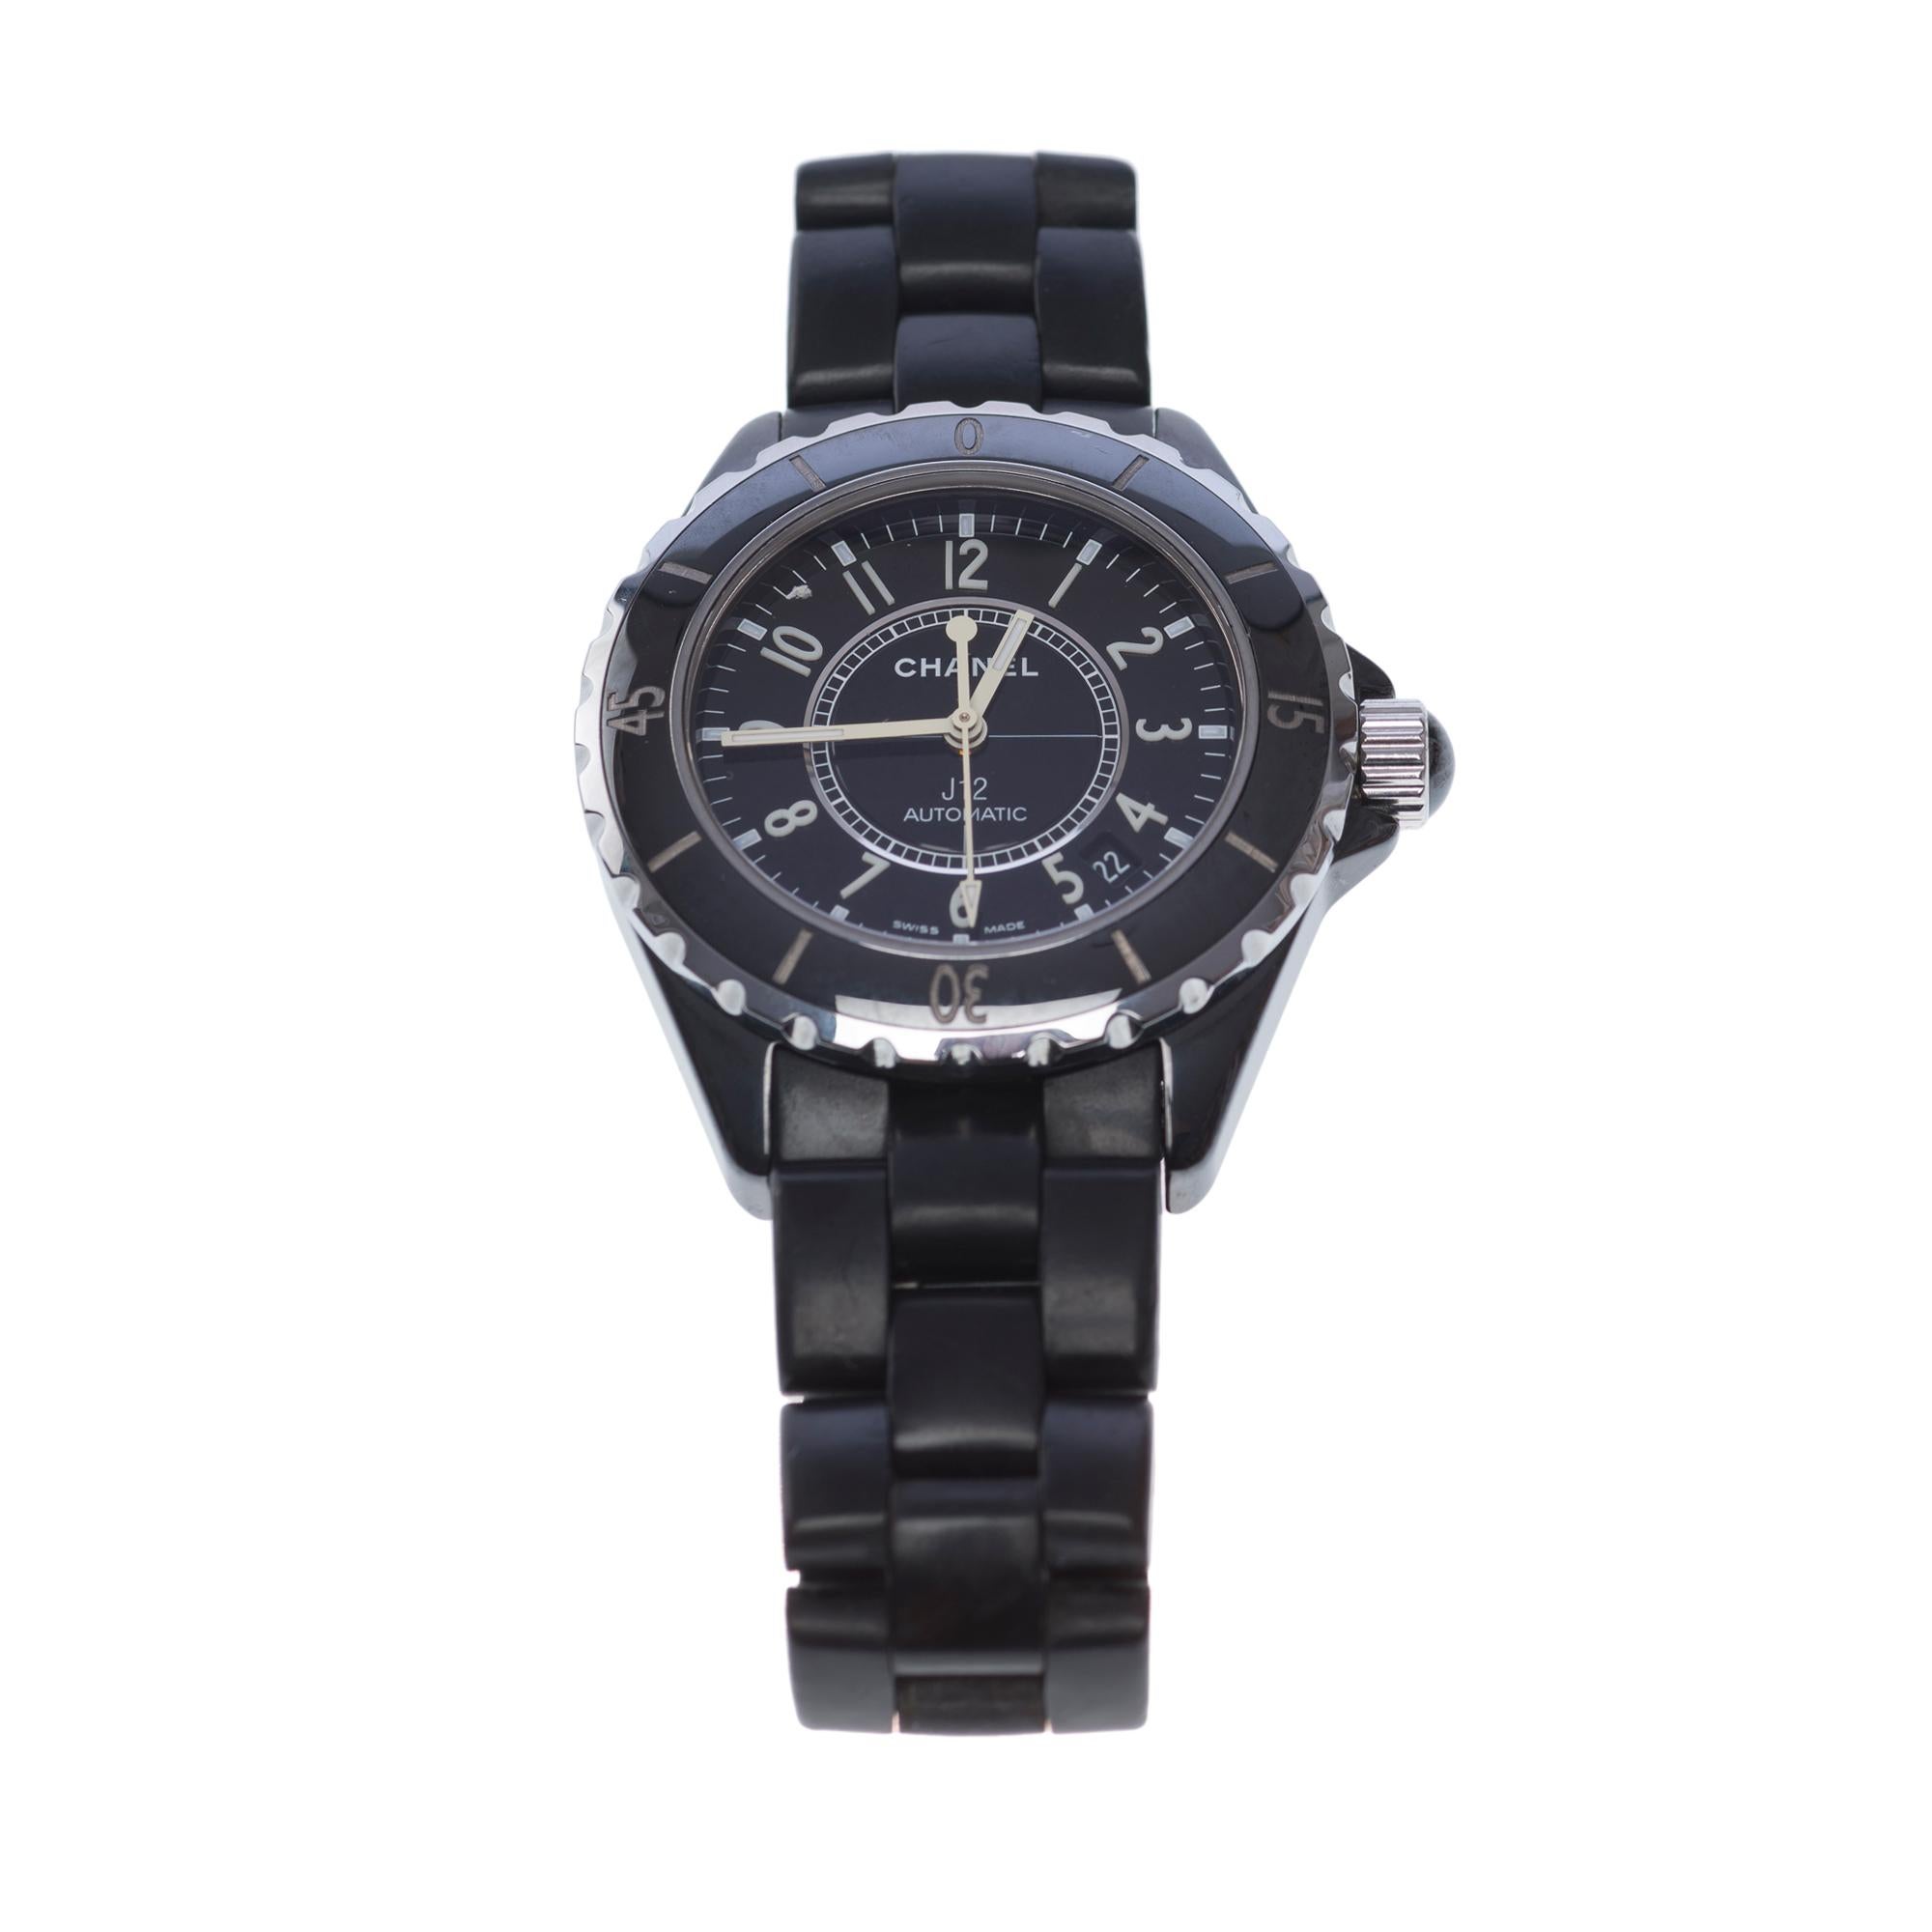 Chanel​ ​J12​ ​automatic​ ​black​ ​ceramic​ ​wristwatch
Round​ ​ceramic​ ​case,​ ​screwed​ ​bottom,​ ​unidirectional​ ​rotating​ ​graduated​ ​bezel,​ ​screwed​ ​crown​ ​set​ ​with​ ​a​ ​cabochon

Dial​ ​silver​ ​timer​ ​railroad,​ ​automatic​